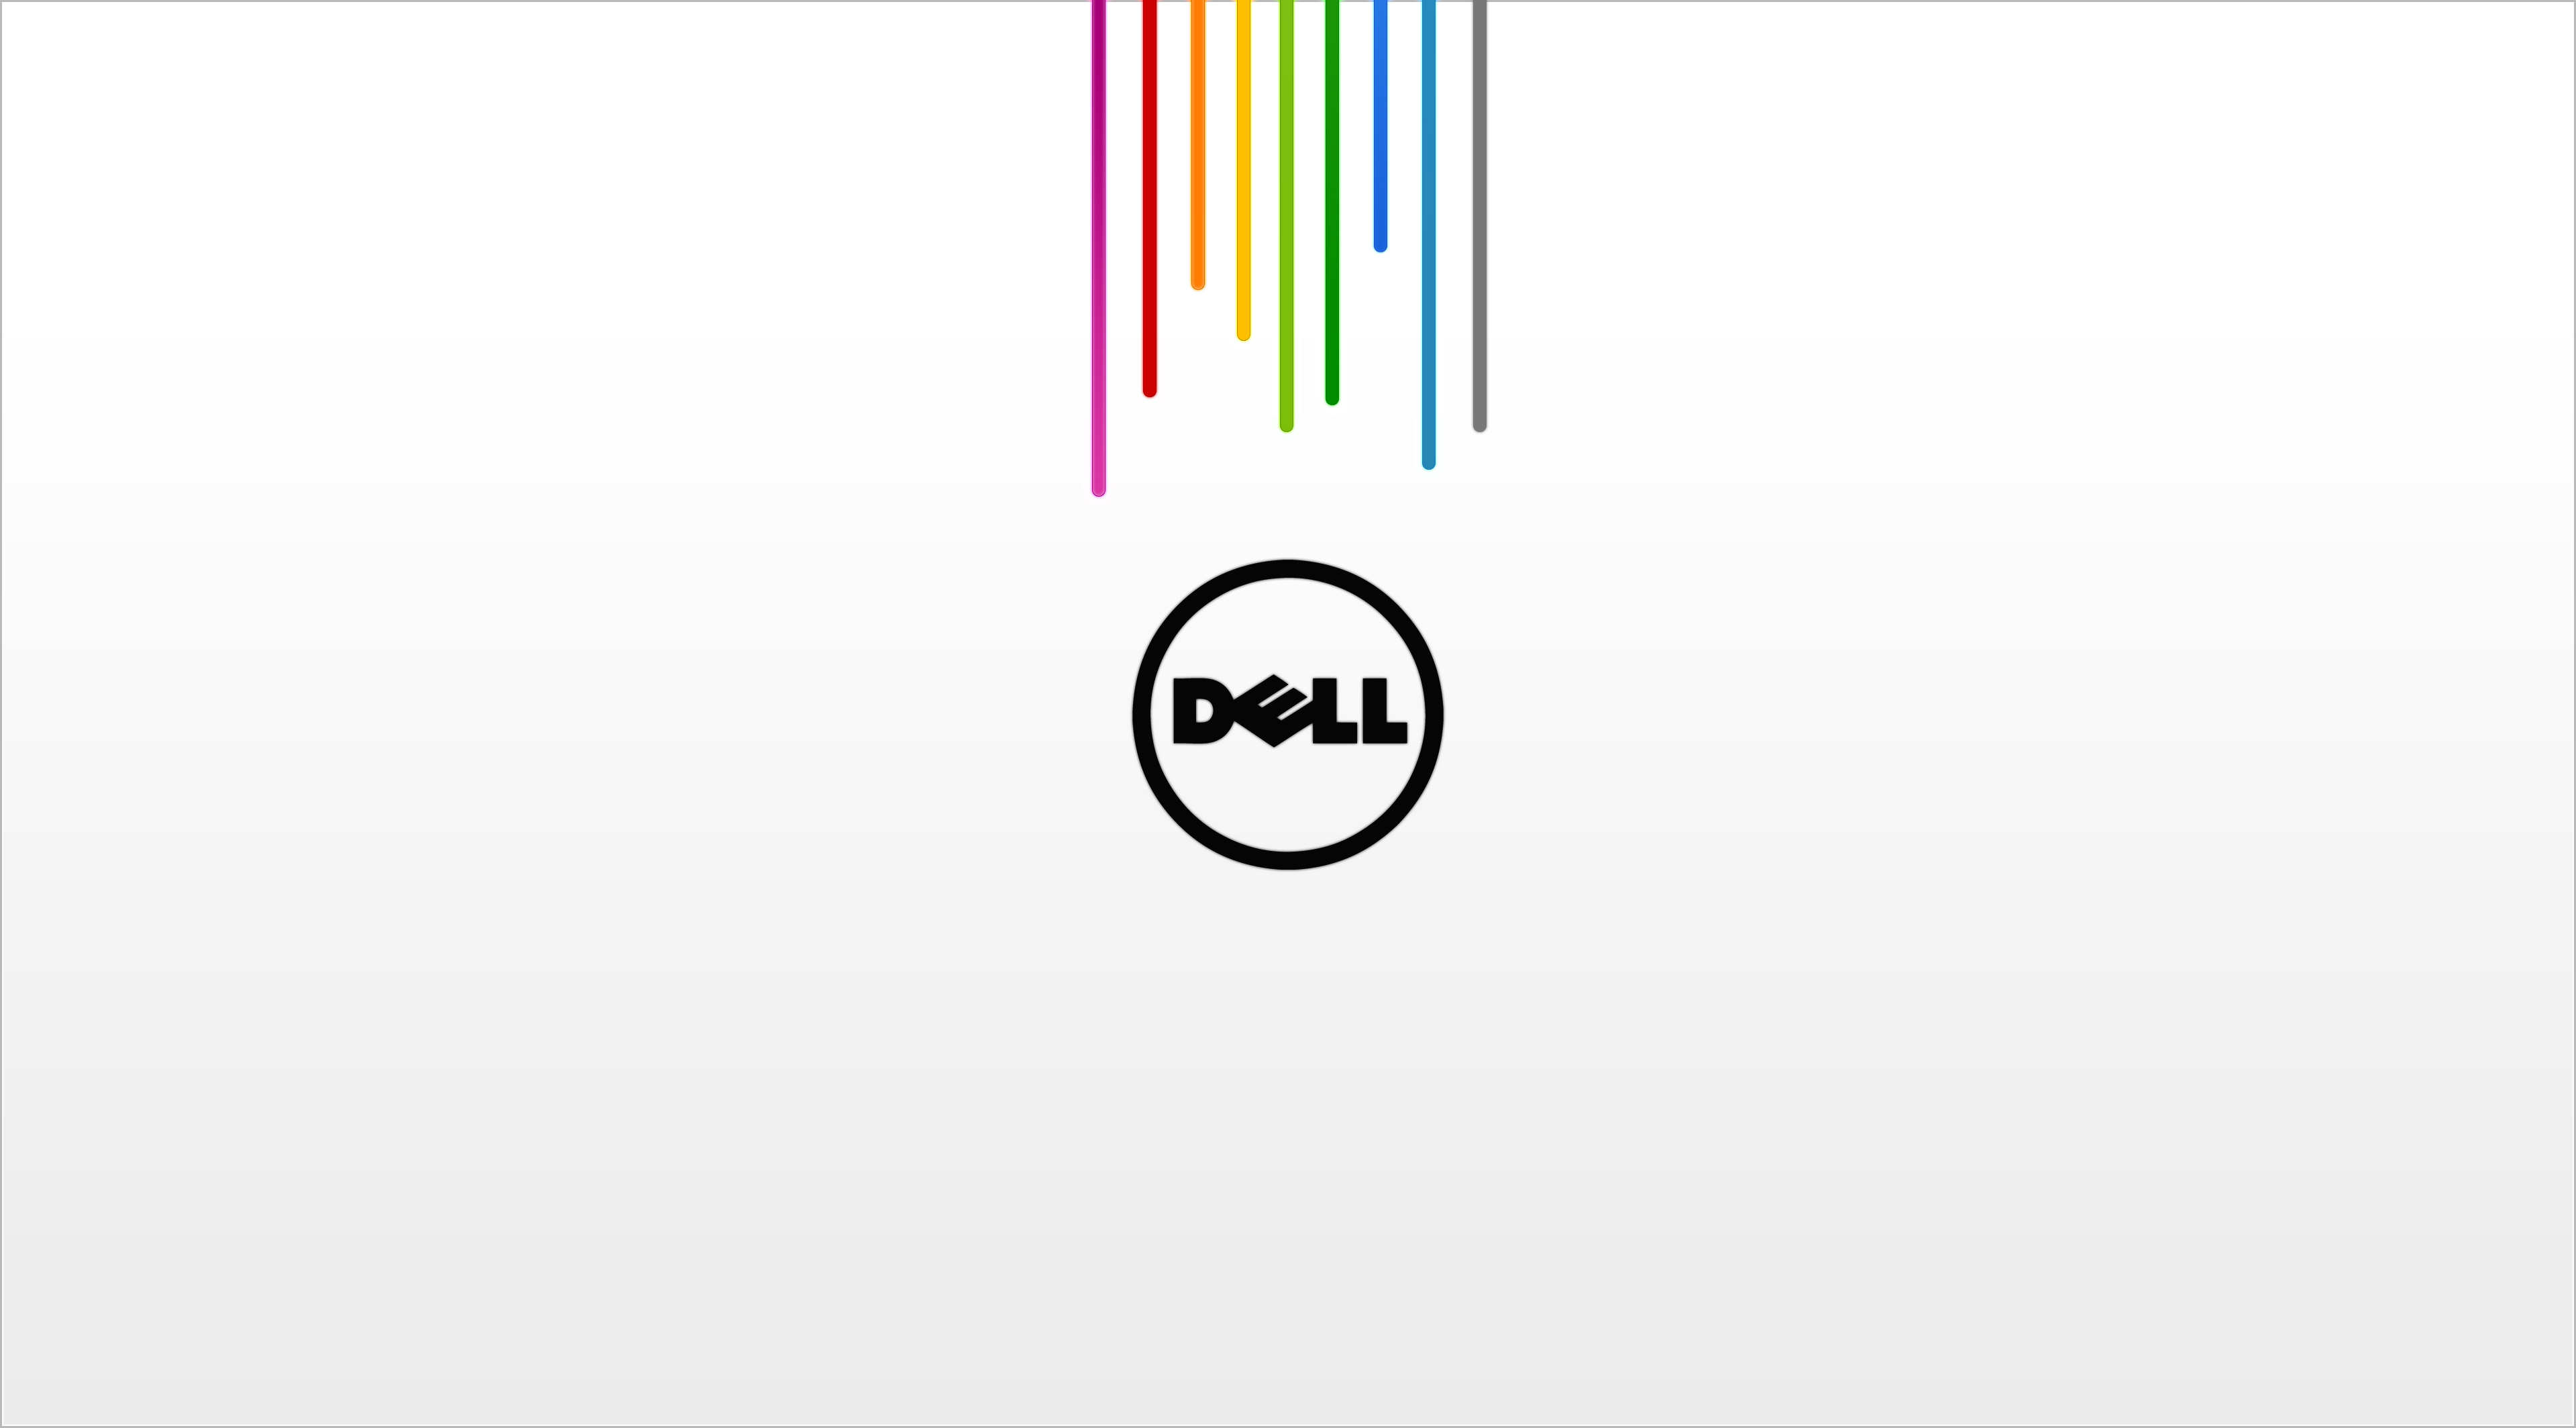  Dell HQ Background Wallpapers